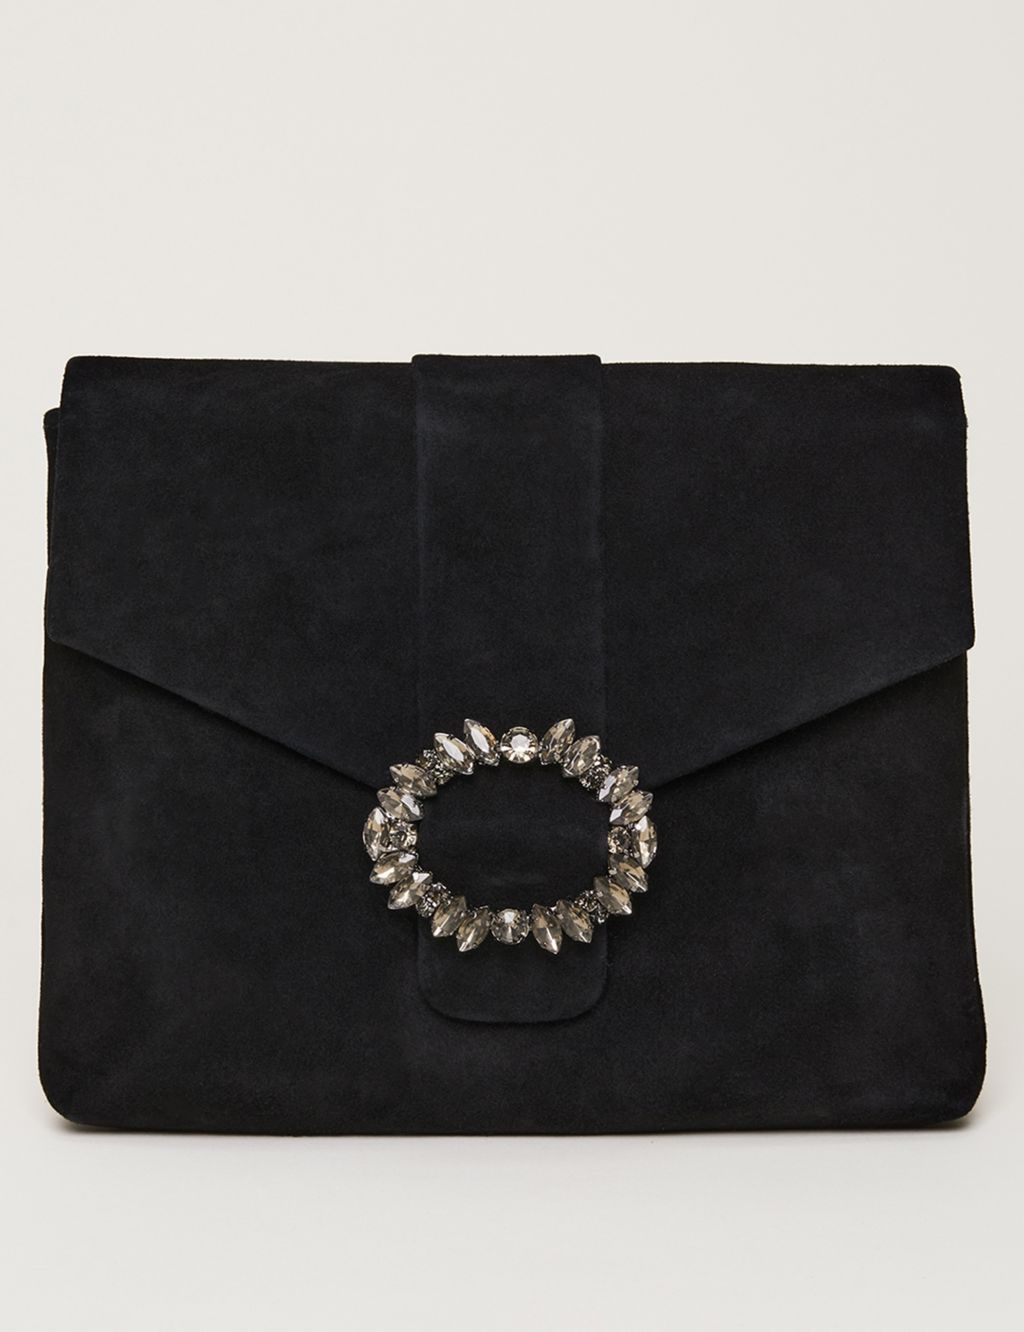 Leather Jewel Front Clutch Bag image 1